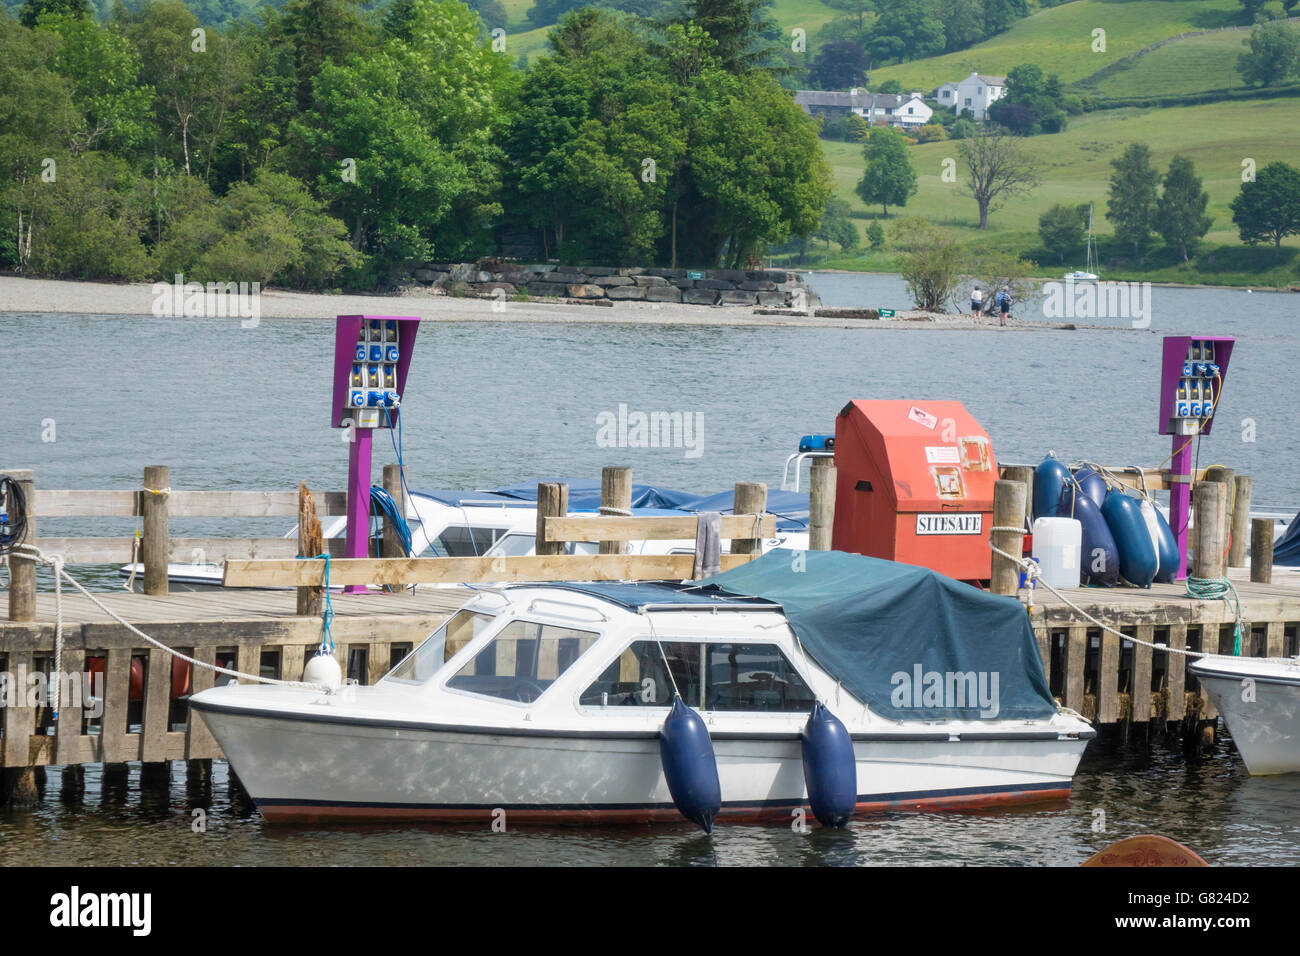 Electric powered small motor boats for hire with charging points on the jetty at Coniston Water Cumbria England Stock Photo